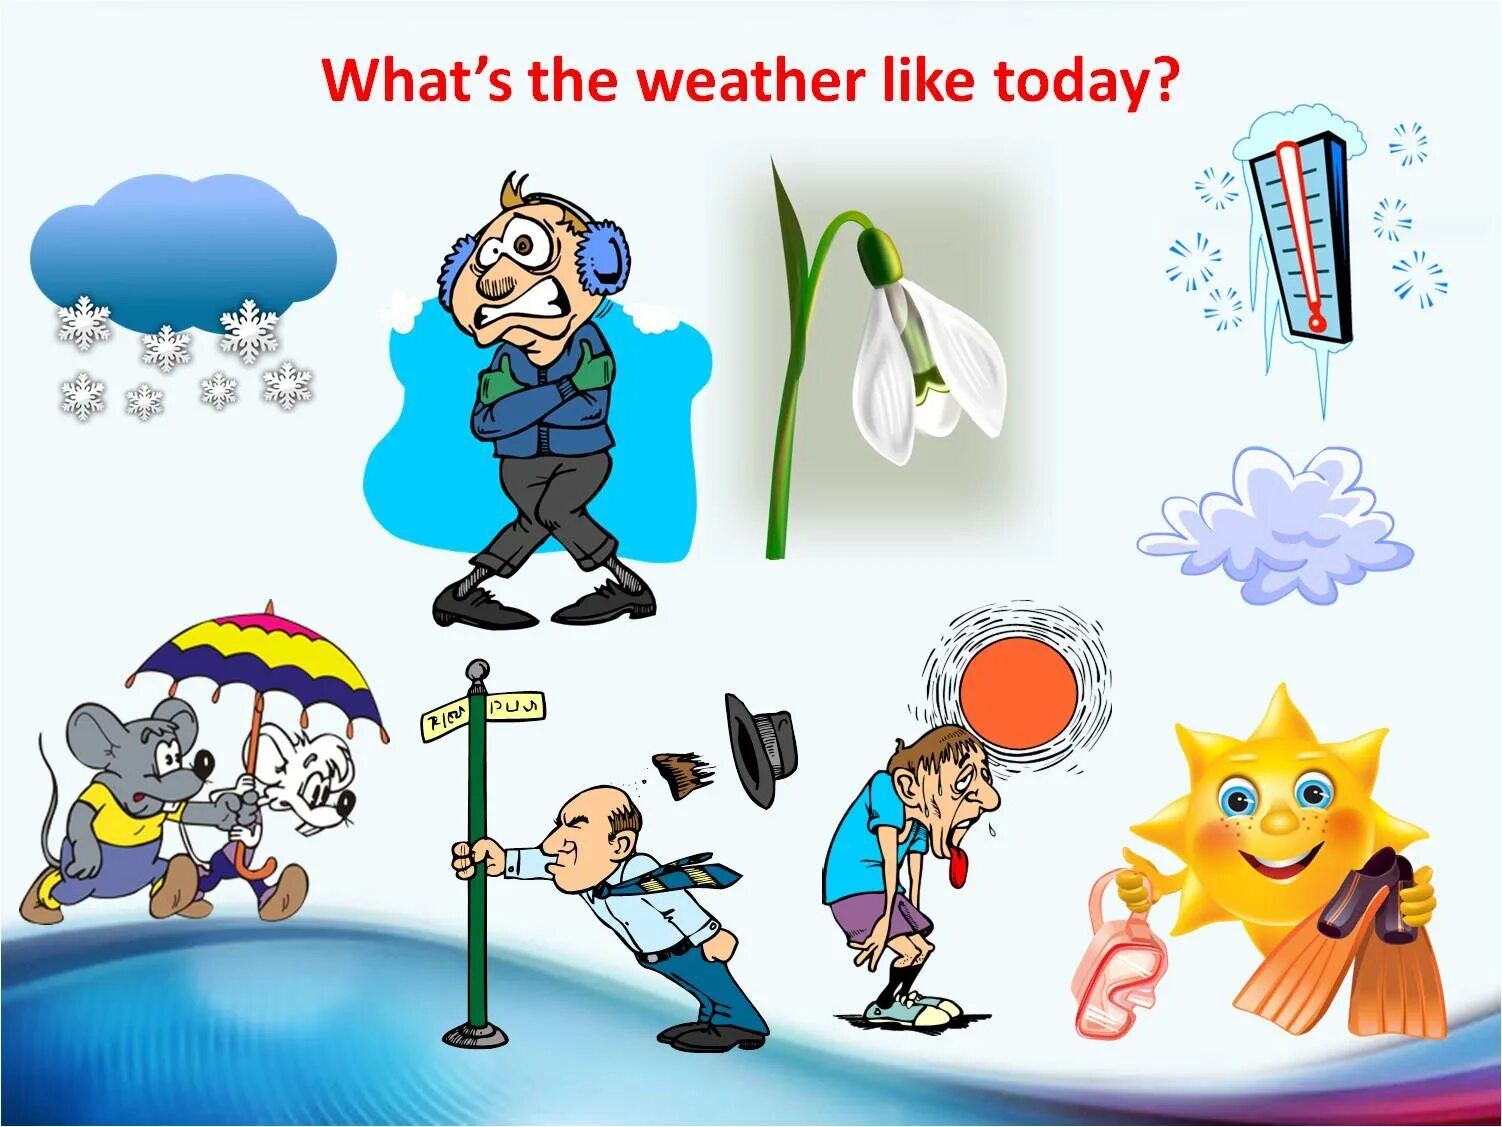 What the weather like today. What is the weather today. What`s the weather like today. Картинки для детей what is the weather today.